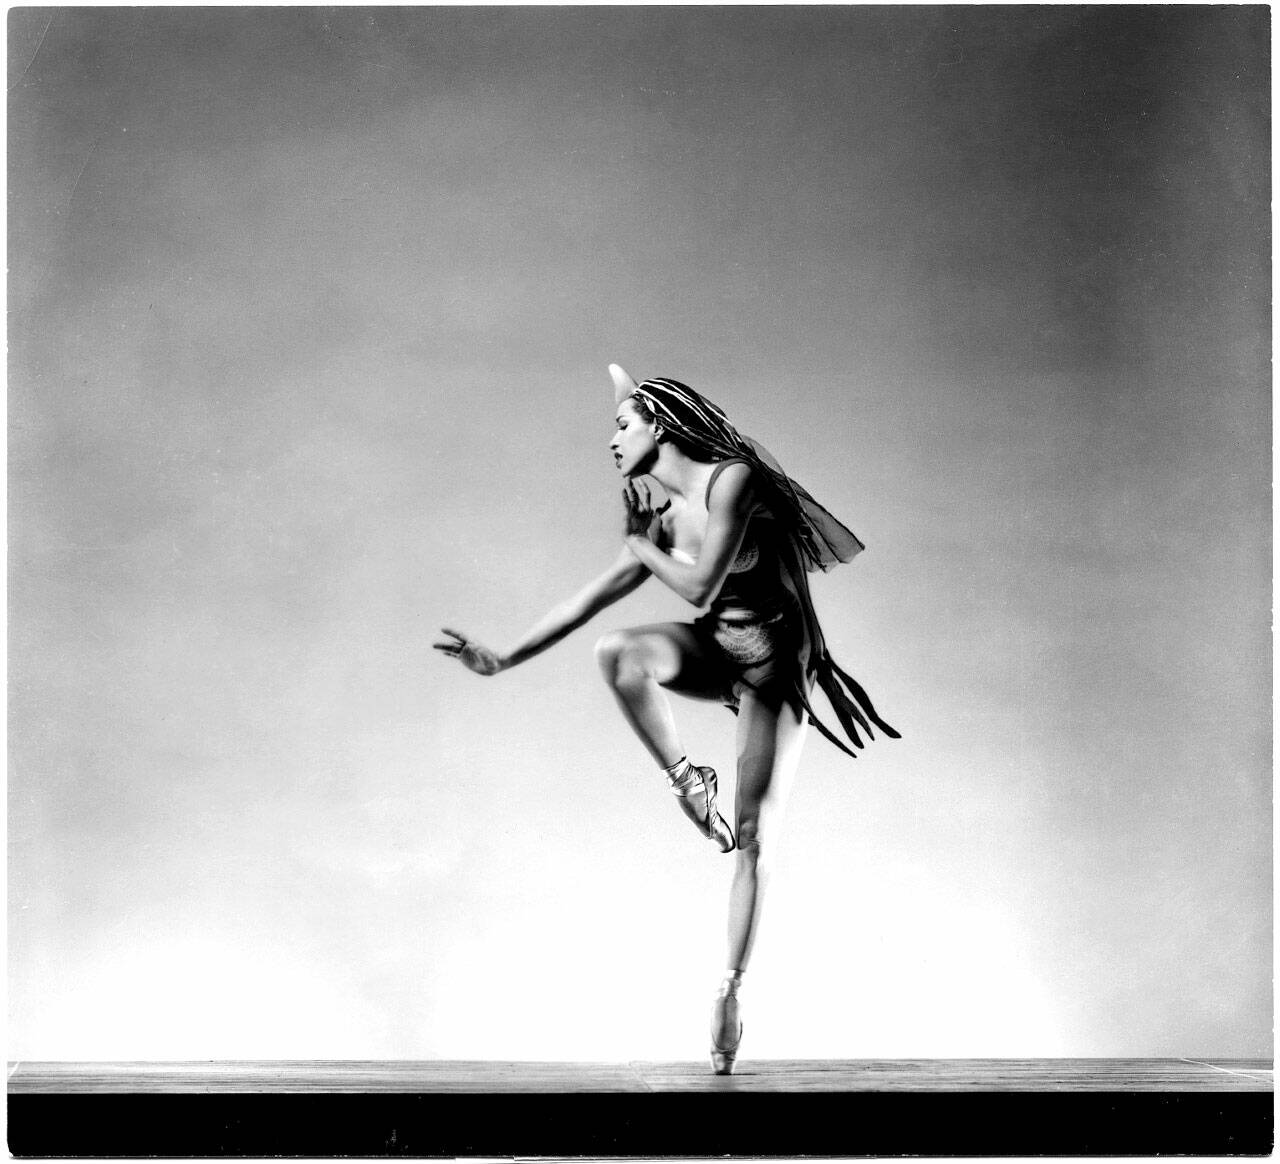 Maria Tallchief’s performance in the ballet Orpheus led to the founding of the New York City Ballet in 1948. (George Platt Lynes)